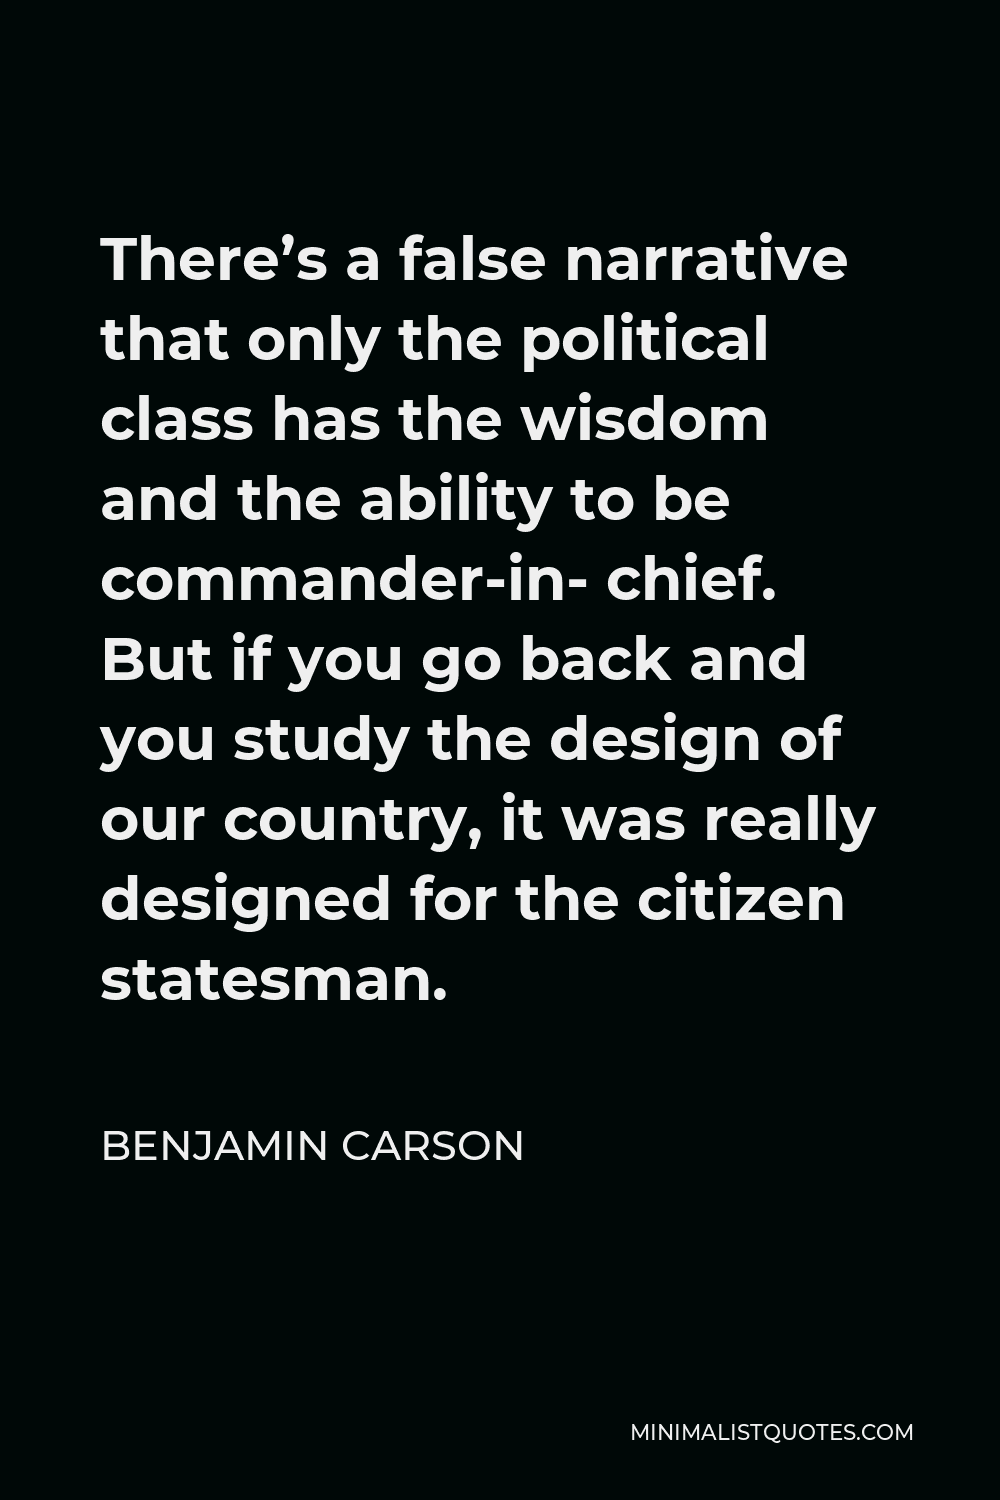 Benjamin Carson Quote - There’s a false narrative that only the political class has the wisdom and the ability to be commander-in- chief. But if you go back and you study the design of our country, it was really designed for the citizen statesman.